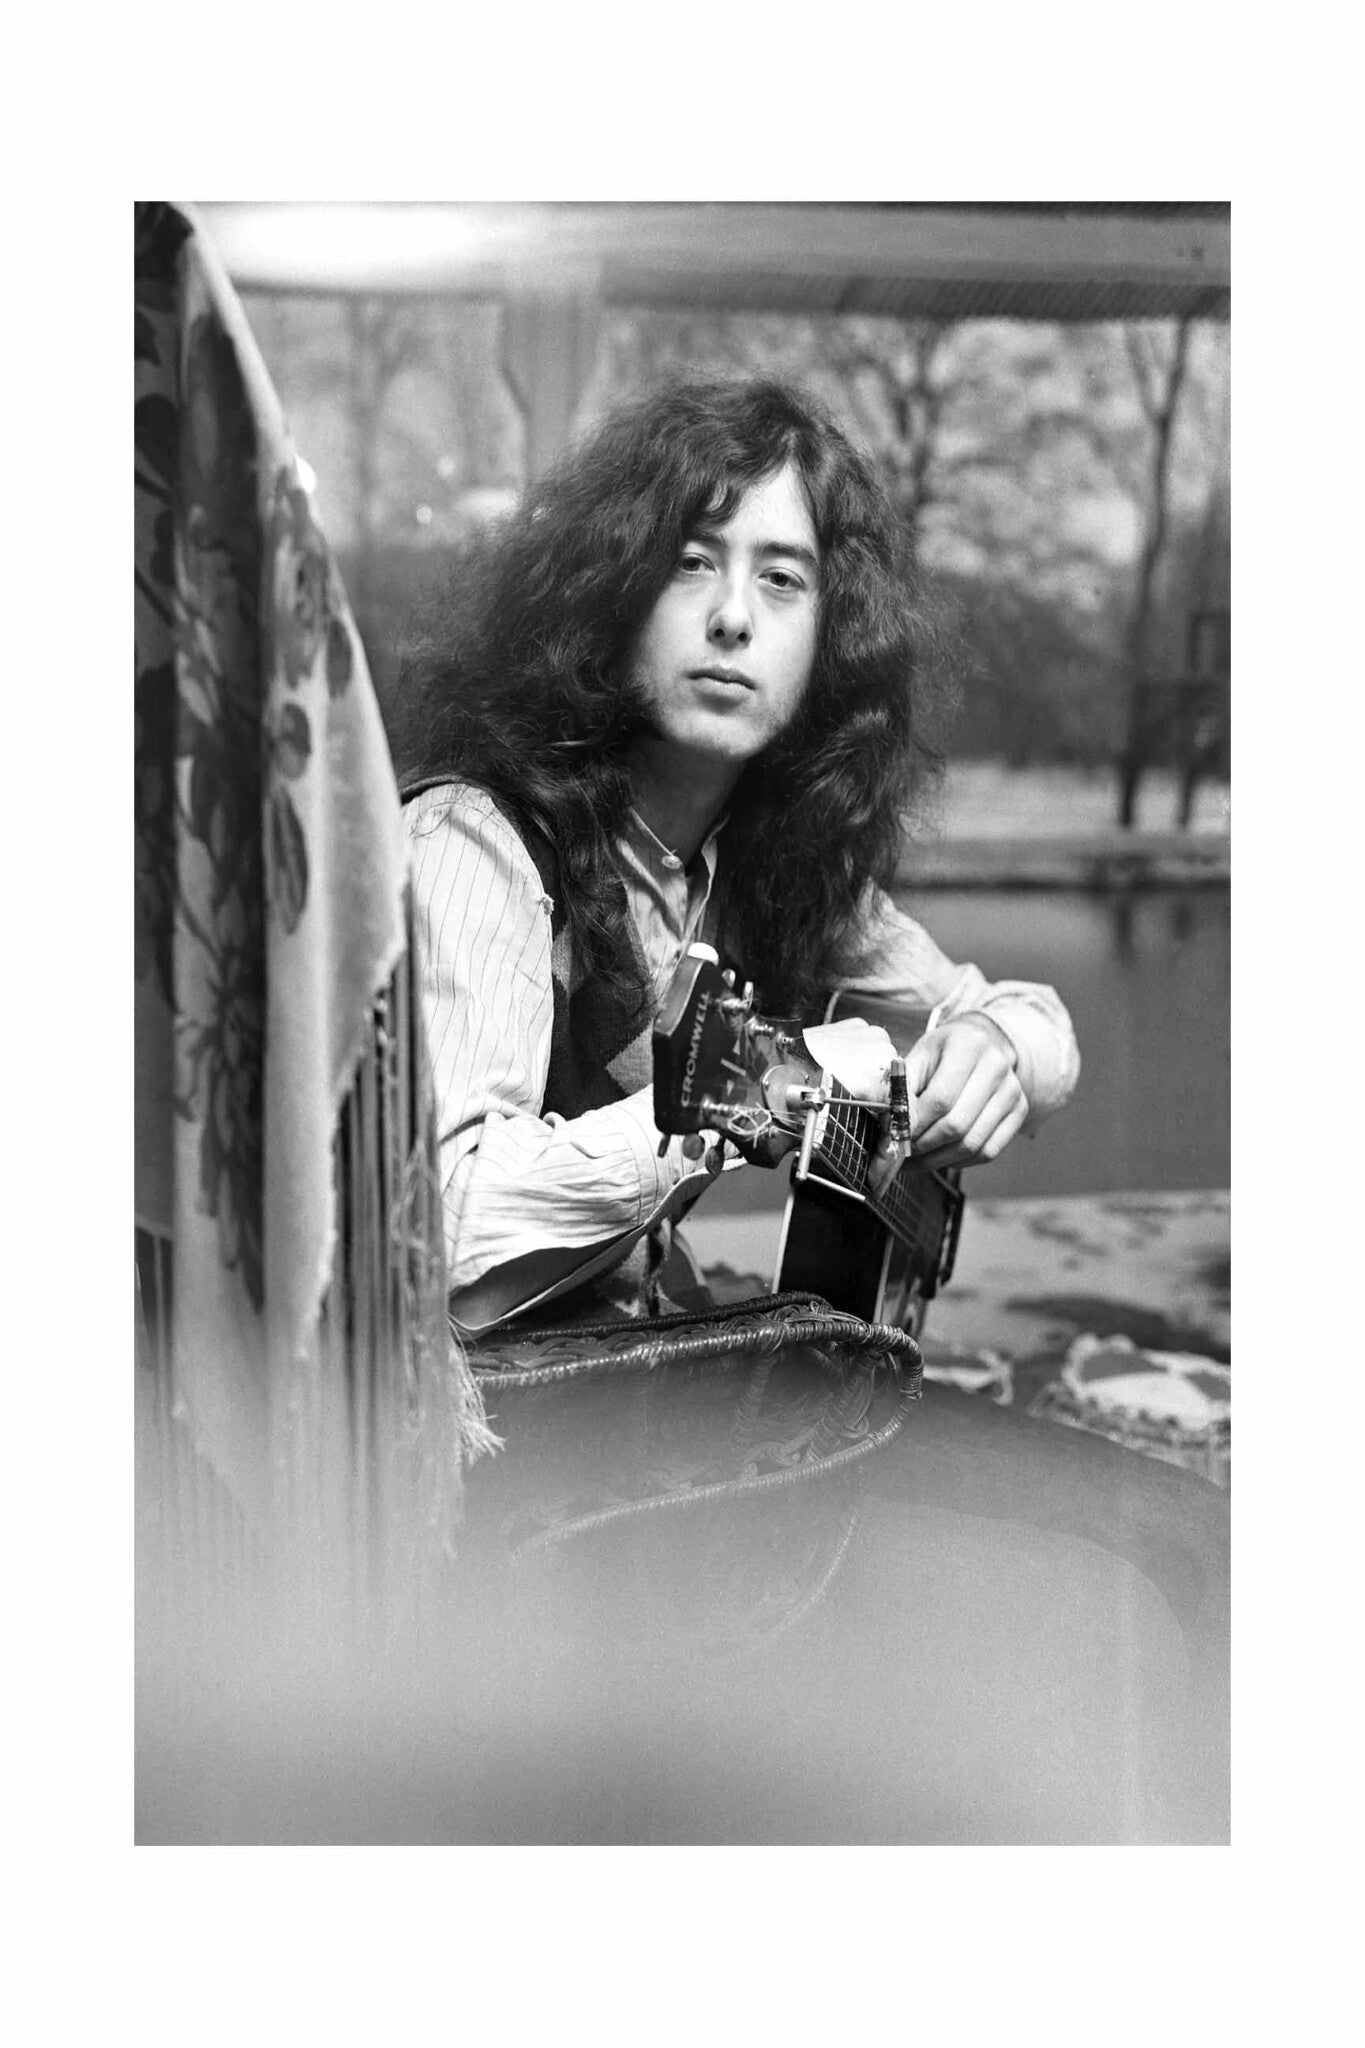 Led Zeppelin - Jimmy Page With His Cromwell Guitar, England, 1970 Poster